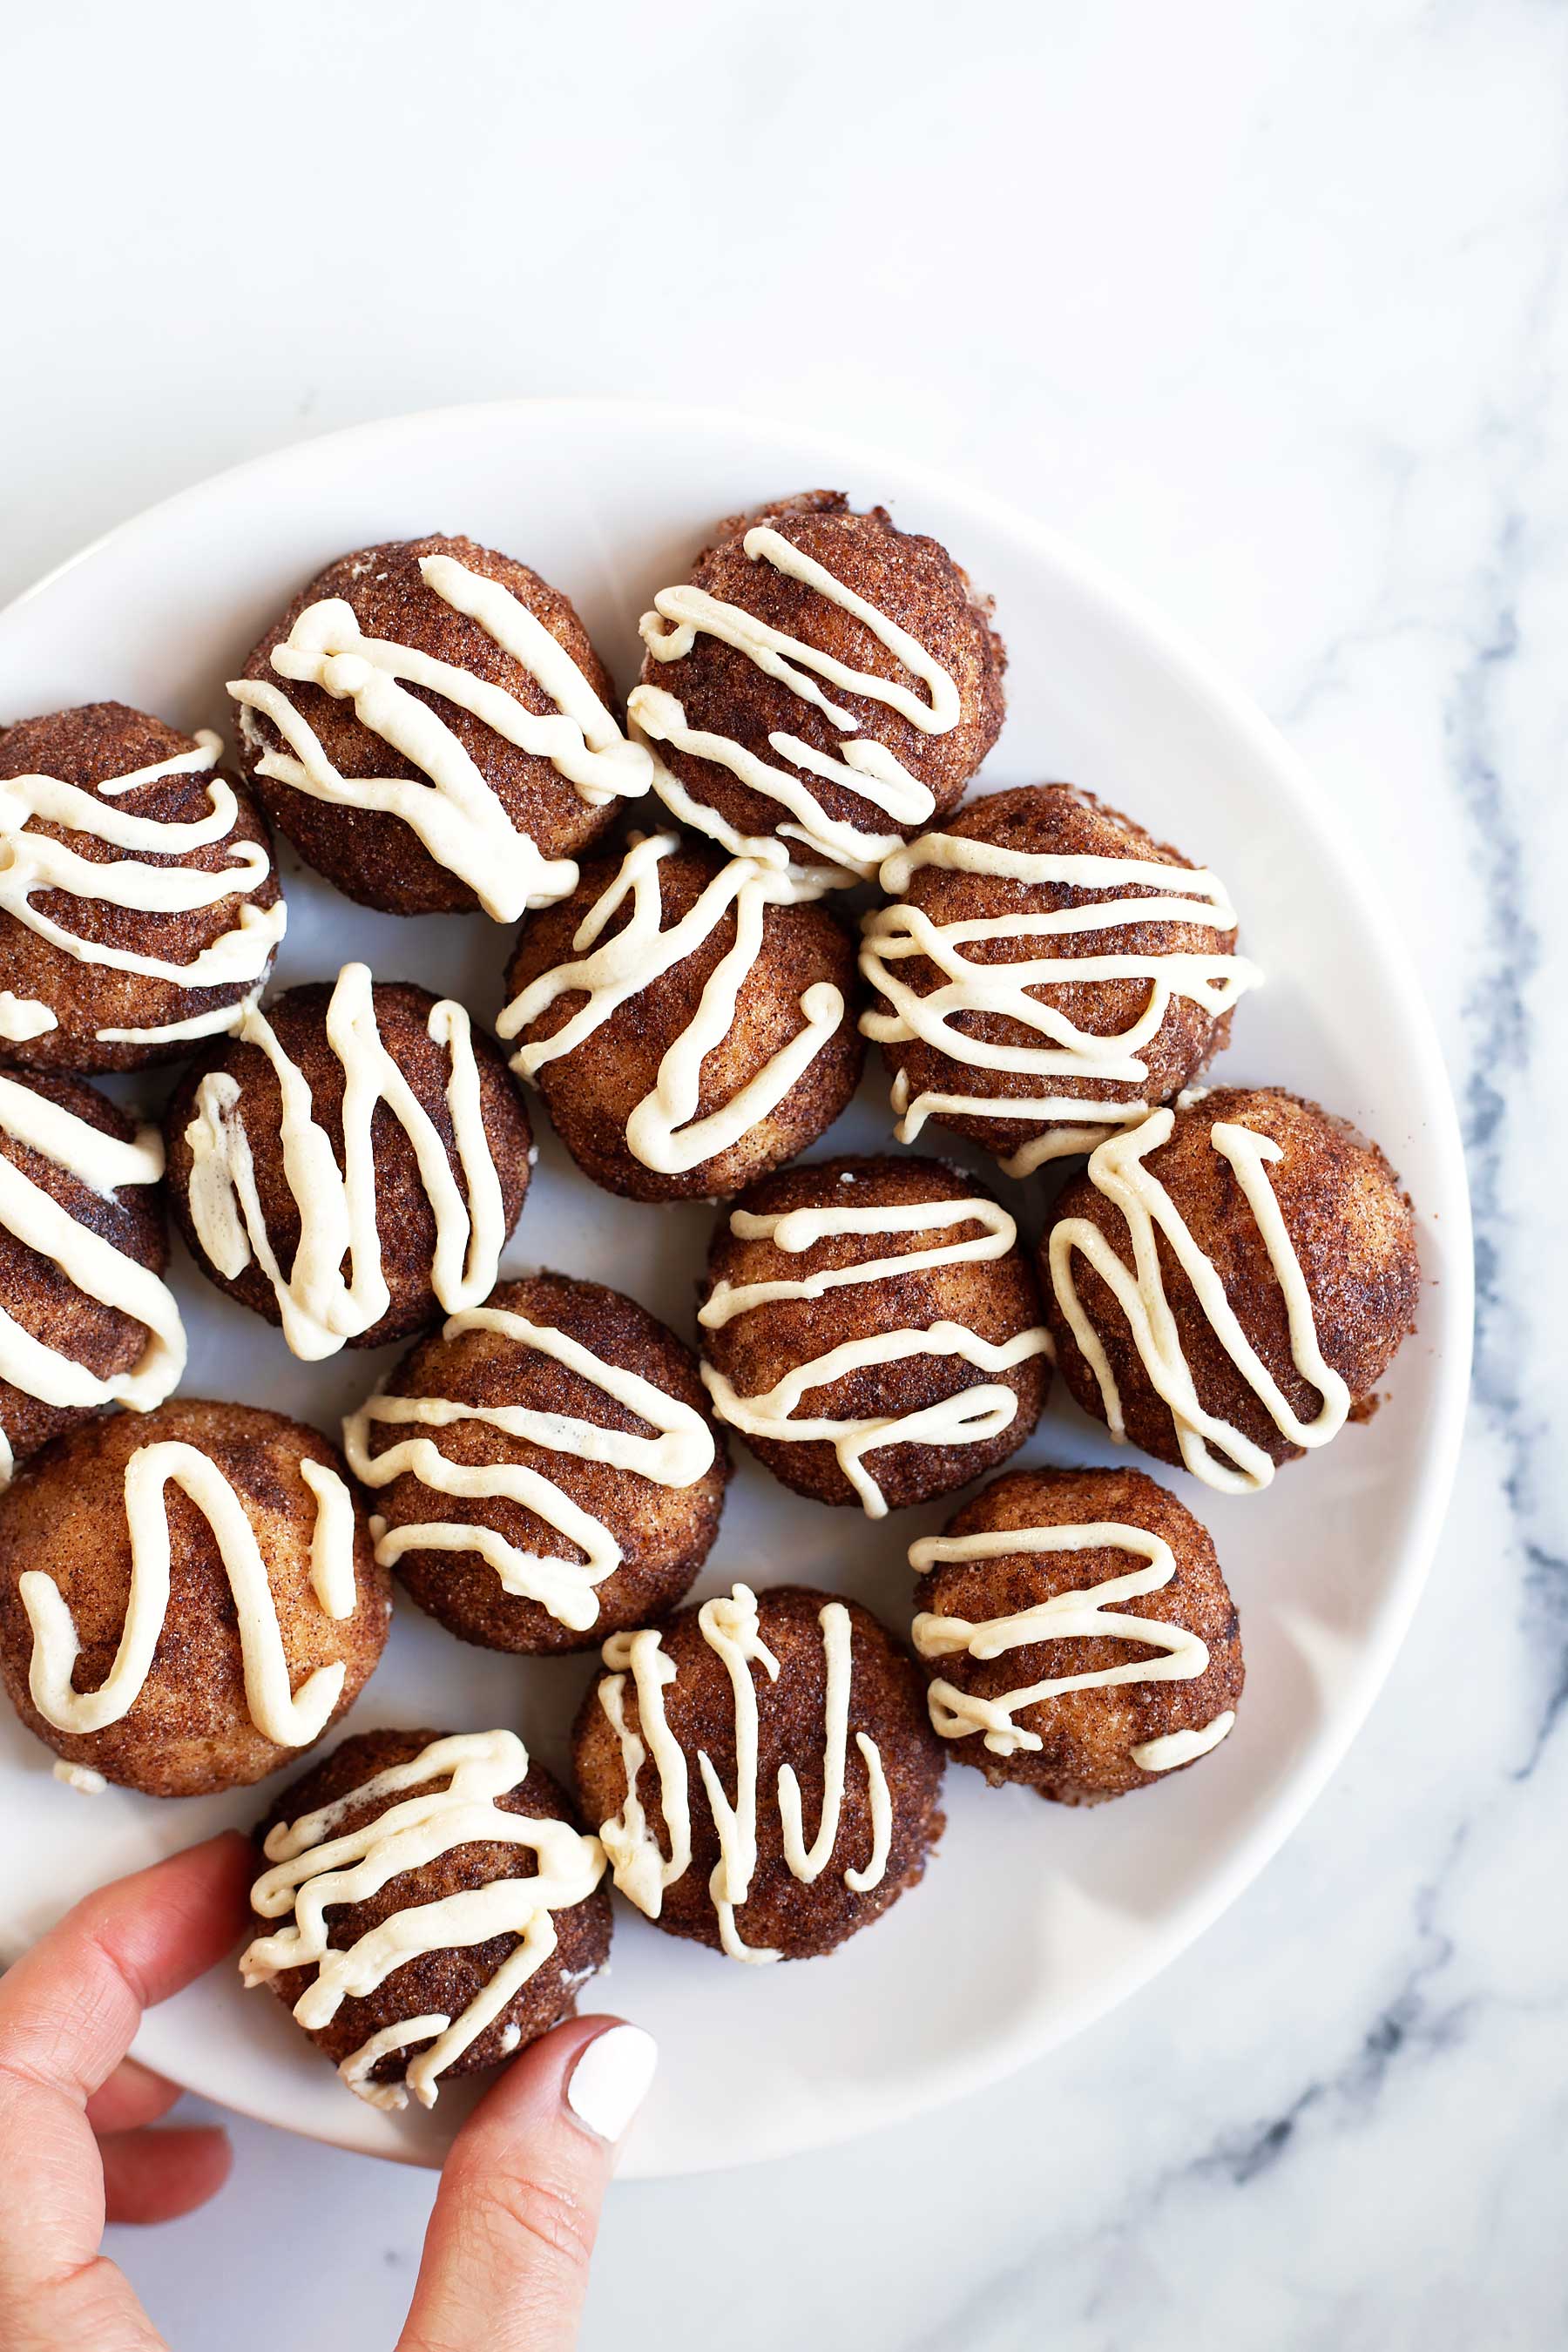 Super easy to make and the perfect texture! Like cinnamon rolls but without all the effort! These Keto Cinnamon Roll Donut Holes are perfect for a quick weekend breakfast. And they only take 30 minutes to make! Keto brunch. Keto breakfast. Keto dessert. Keto donut holes. Keto cinnamon rolls. Healthy cinnamon rolls. Gluten Free cinnamon rolls. #healthybreakfast #ketobreakfast #ketodessert #ketocinnamonrolls #glutenfreecinnamonrolls #lowcarbbrunch #lowcarbdessert #healthydessert #lakanto #sugarfreedessert 